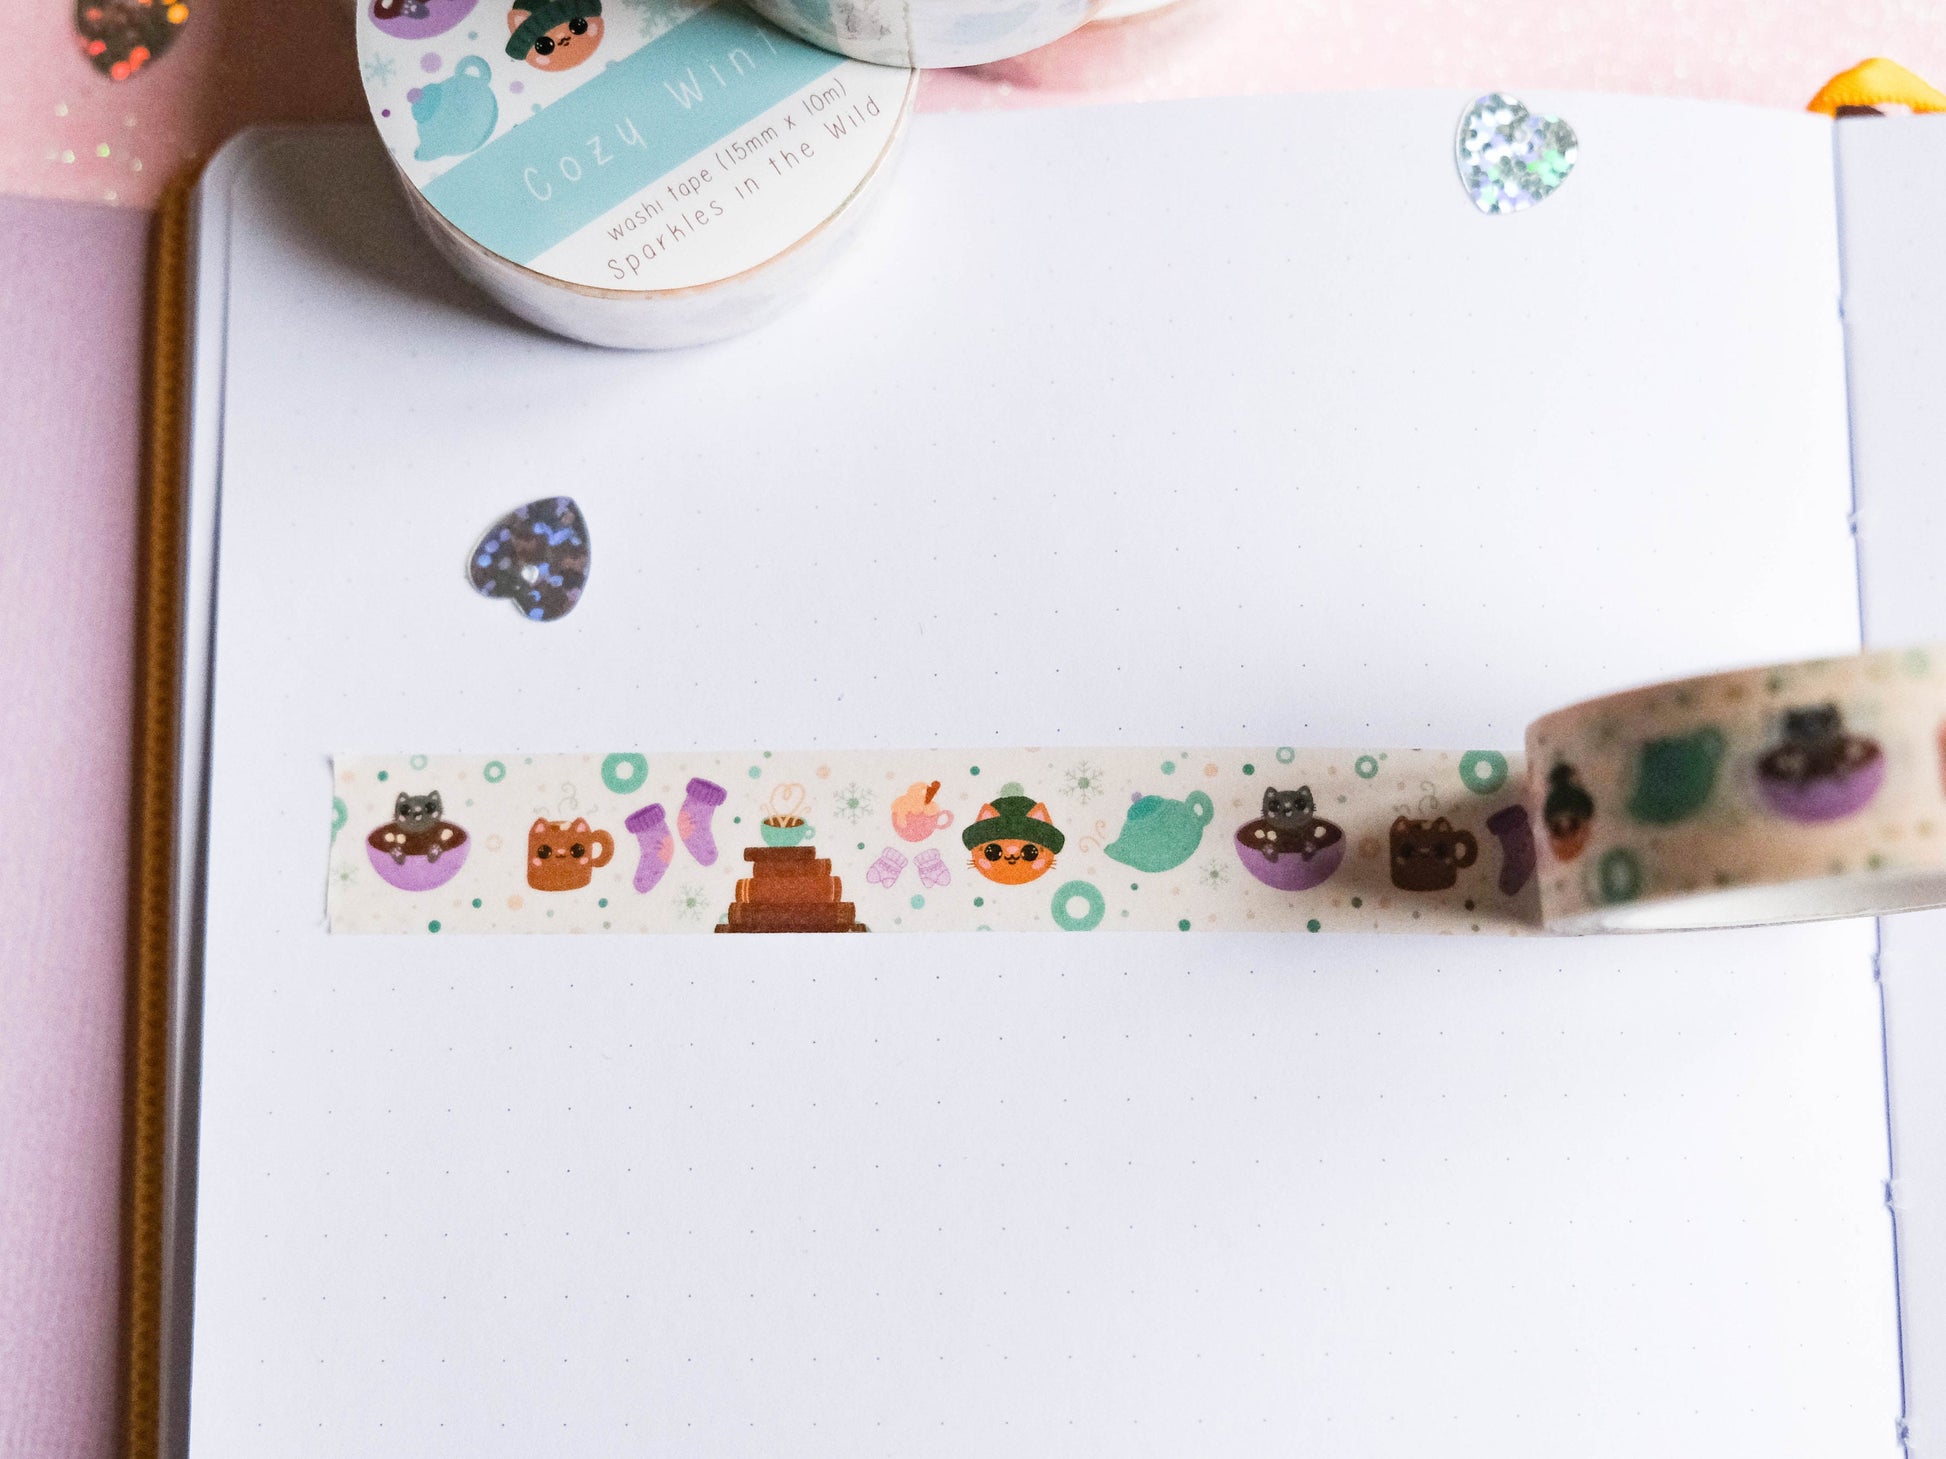 Cute Cat & Hot Drinks Cozy Winter Washi tape – Sparkles in the Wild